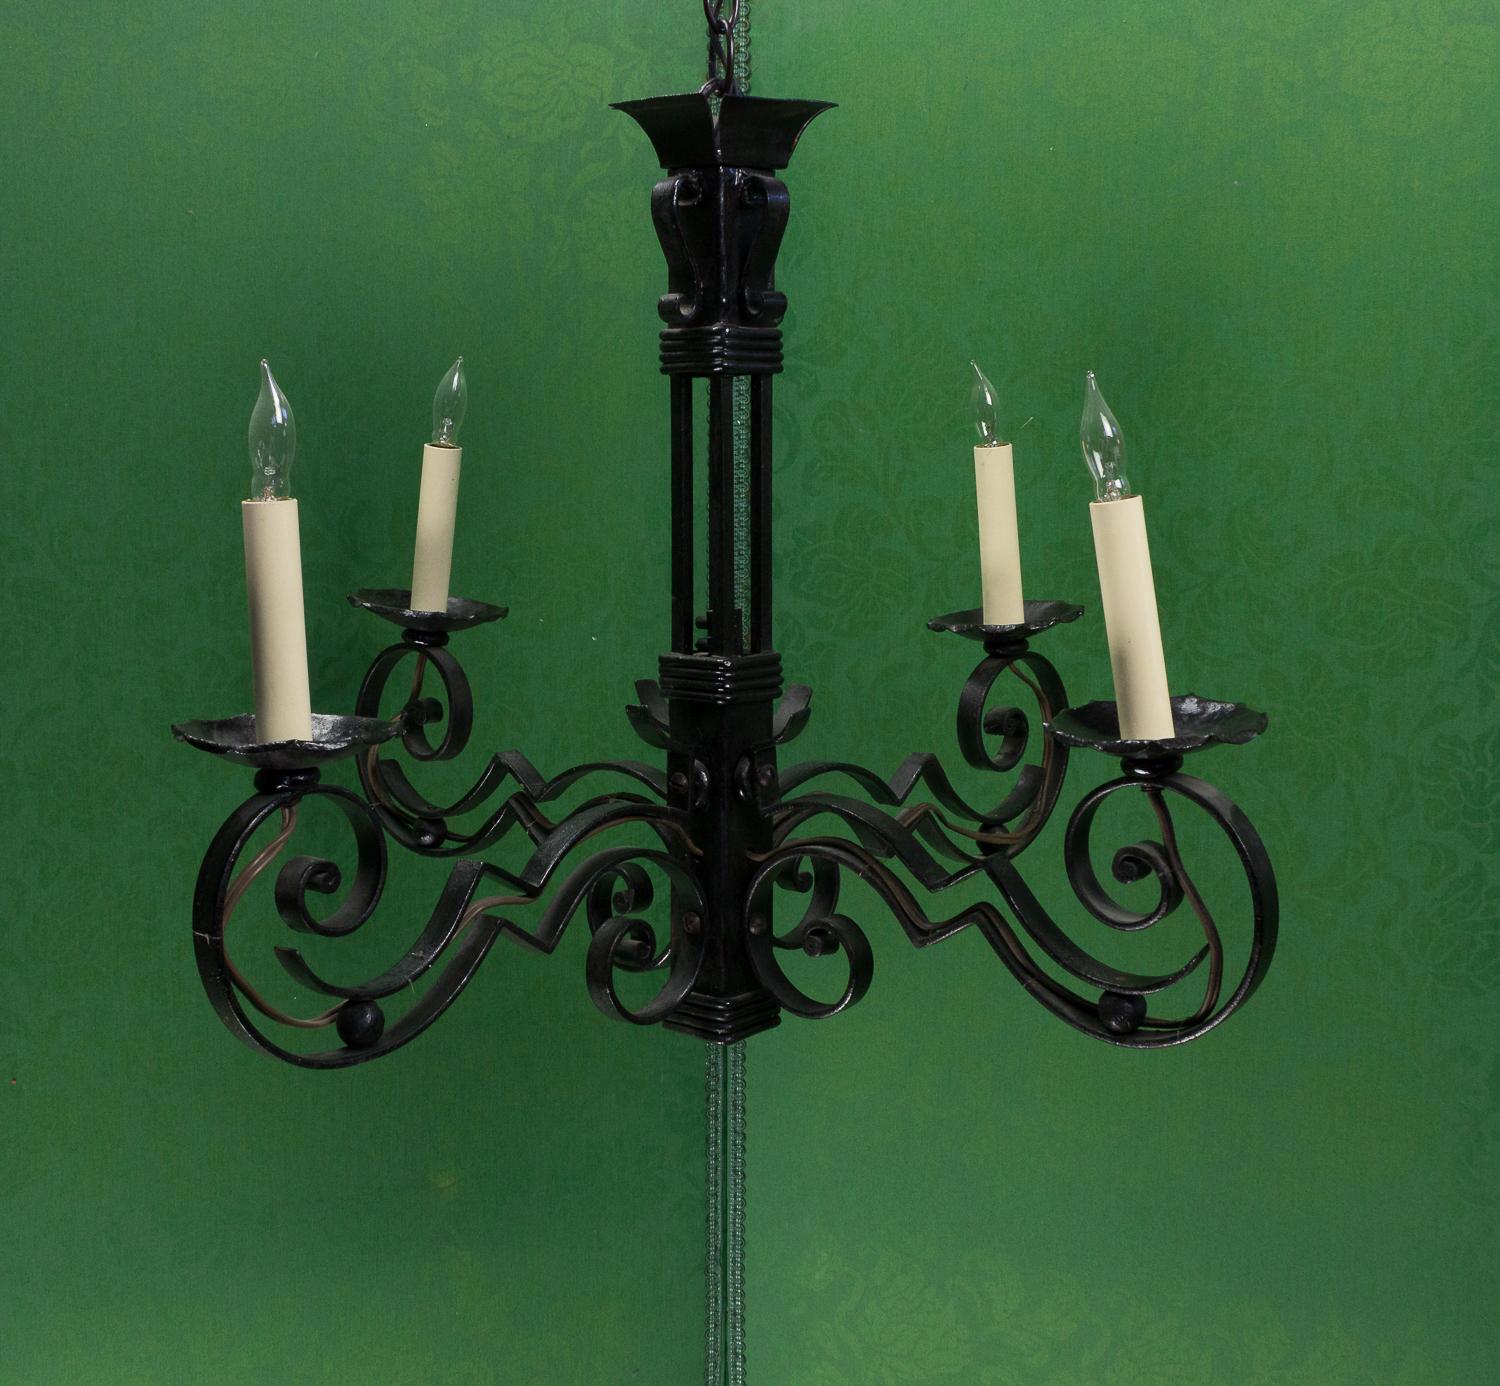 This French 1930s black iron chandelier is a unique piece that is sure to become the centerpiece of any room. Crafted in an Art Deco style, the chandelier boasts delicate intricate scrolled iron detailing, showcasing the craftsmanship and attention